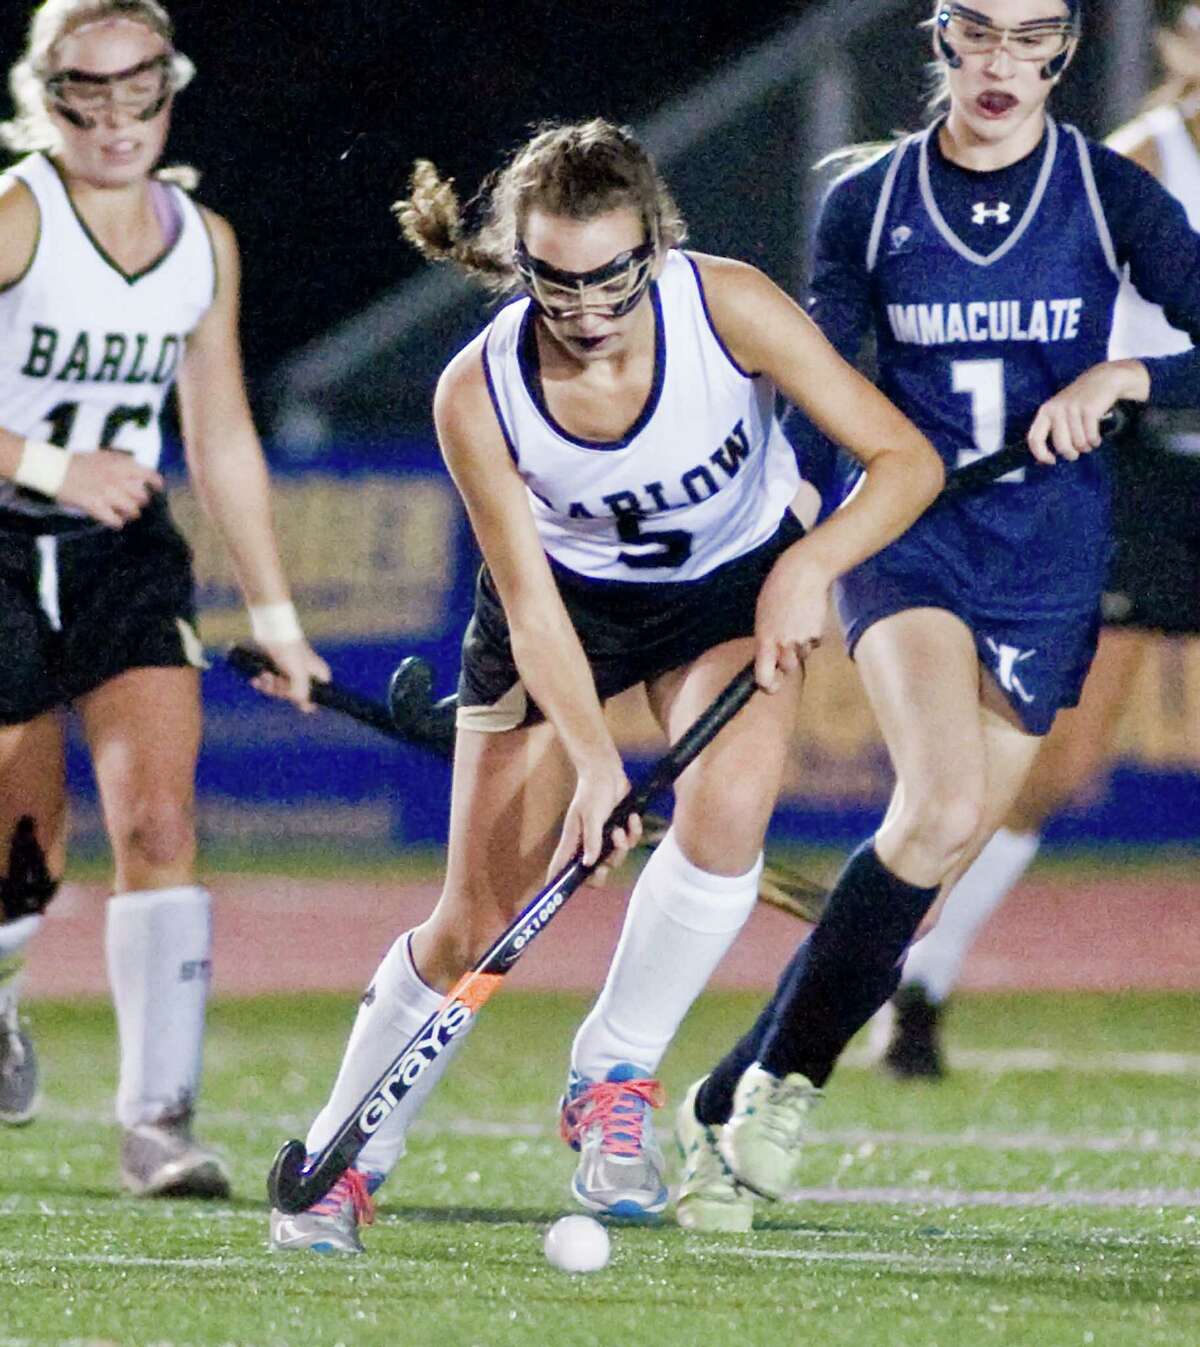 Joel Barlow High School's Gloria Davey pushes the ball in the SWC field hockey championship game against Immaculate High School, played at Brookfield High School. Wednesday, Nov. 4, 2015